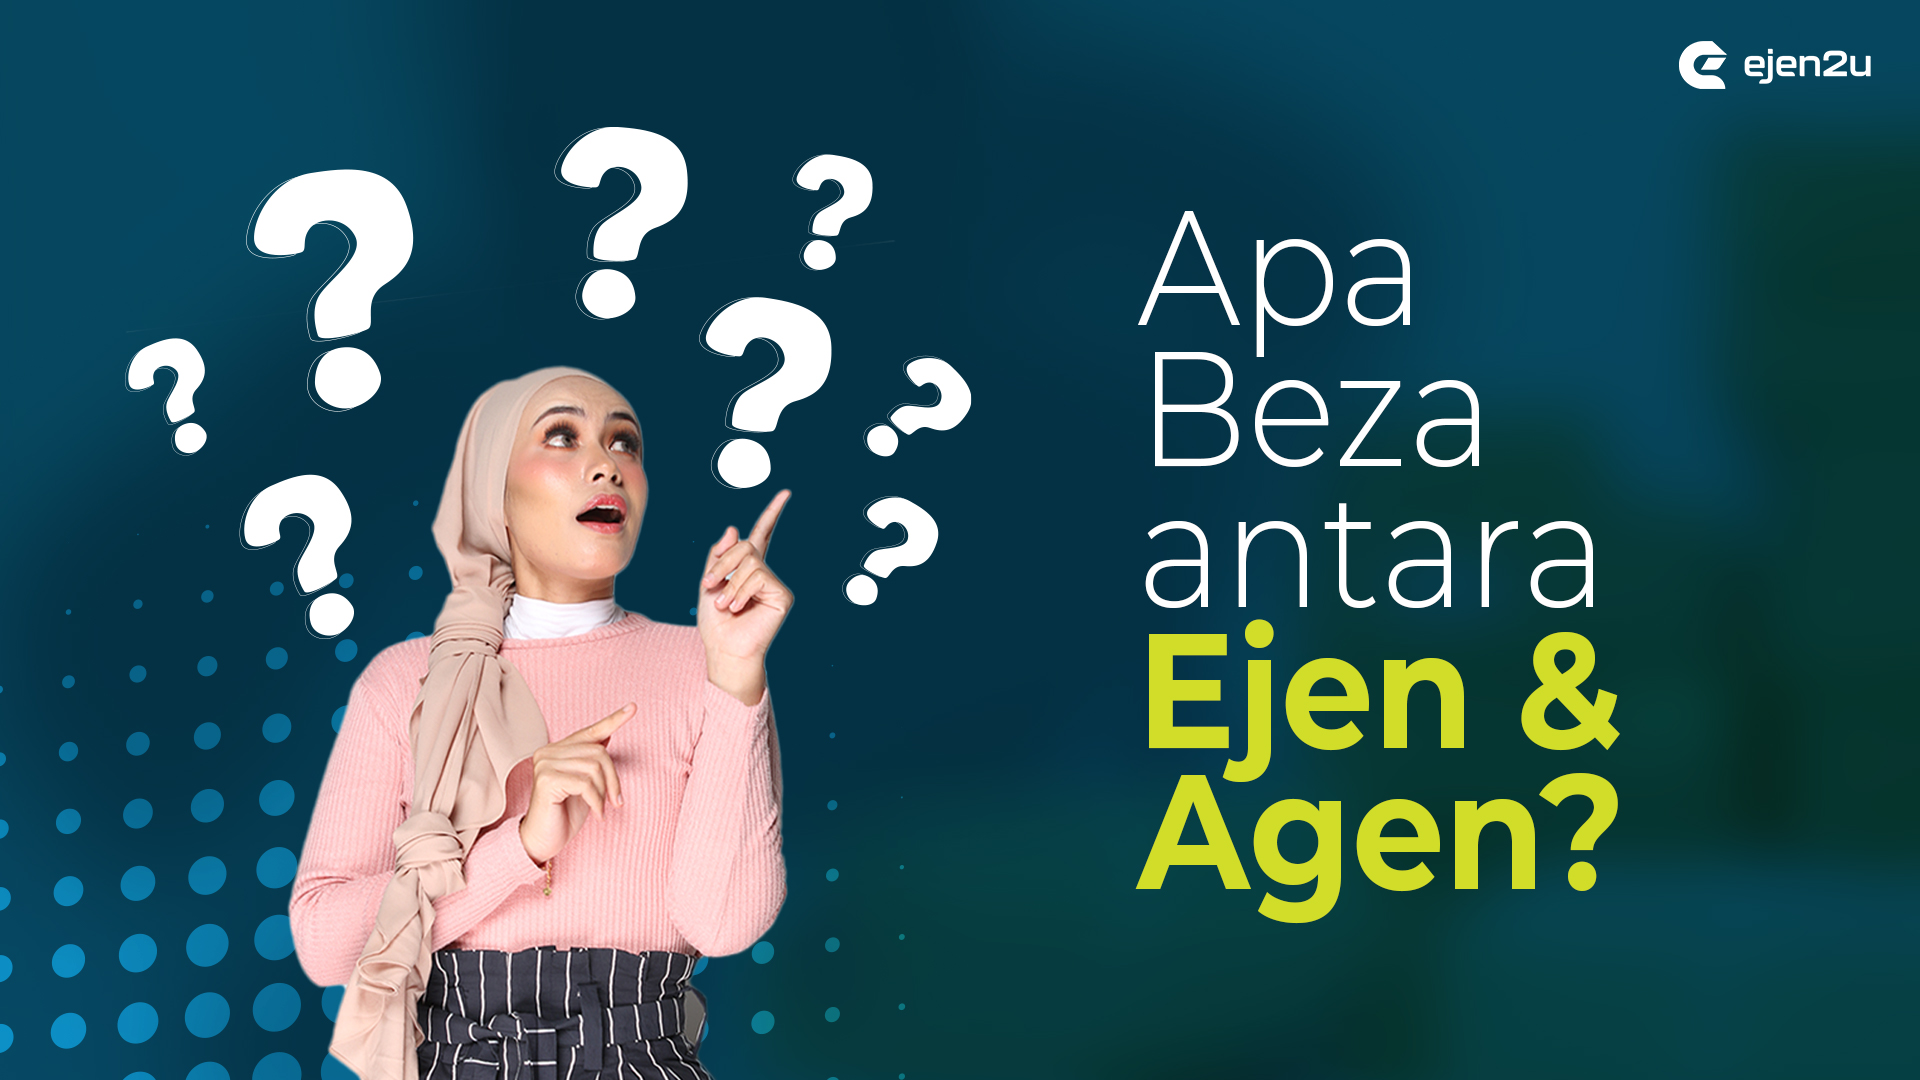 Woman with question marks and wording "Apa Beza antara Ejen & Agen"